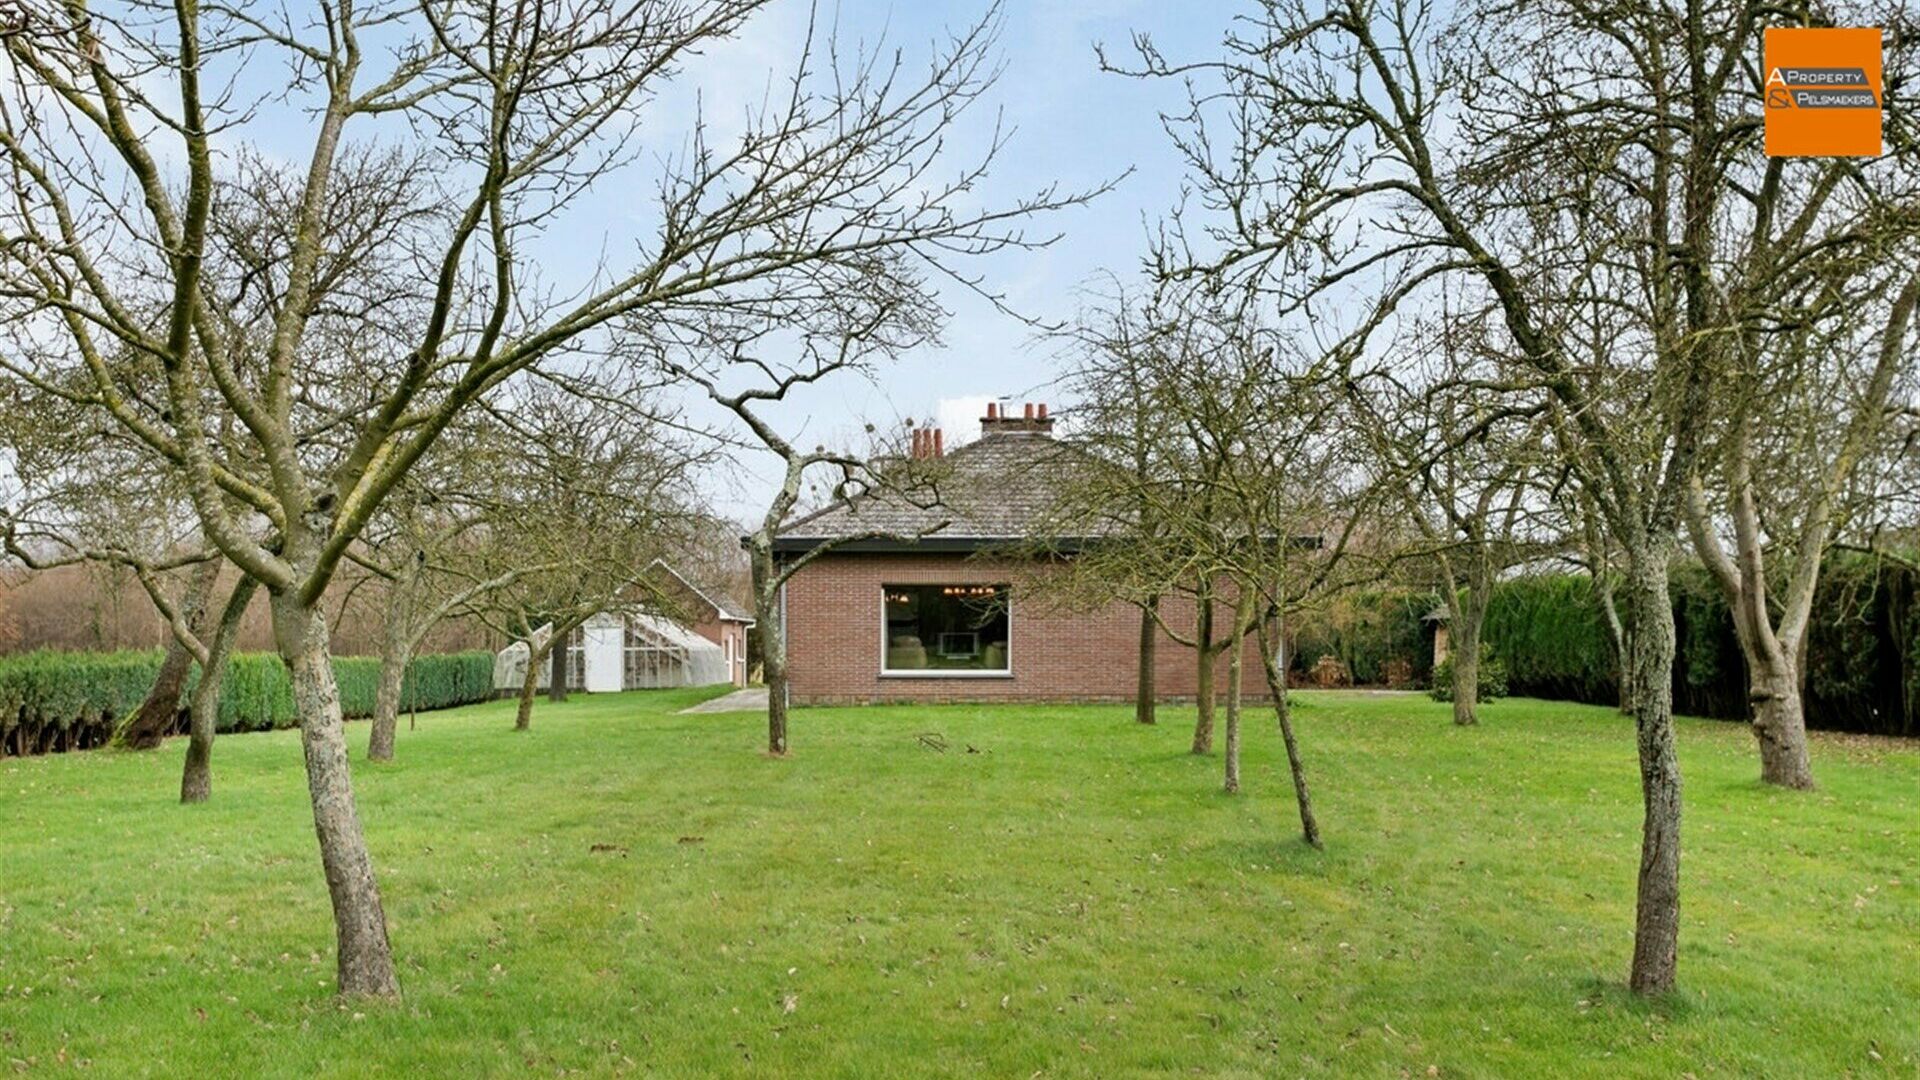 Bungalow for sale in EVERBERG